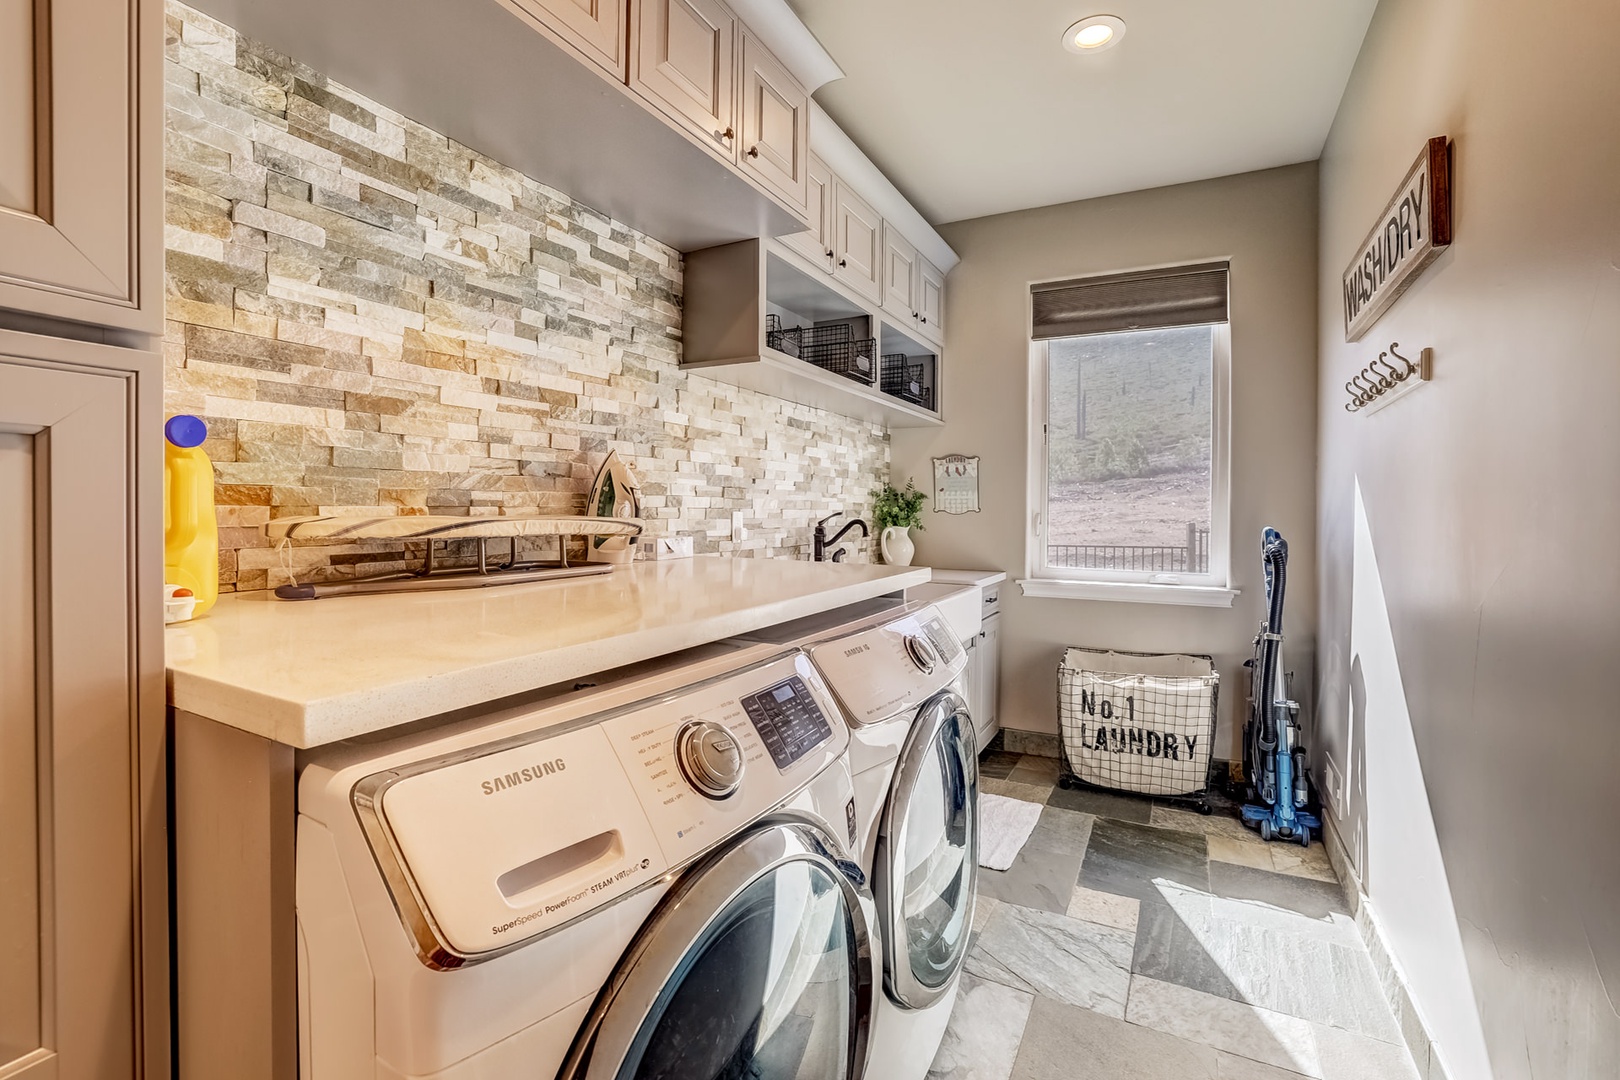 Washer and dryer accessible in laundry room